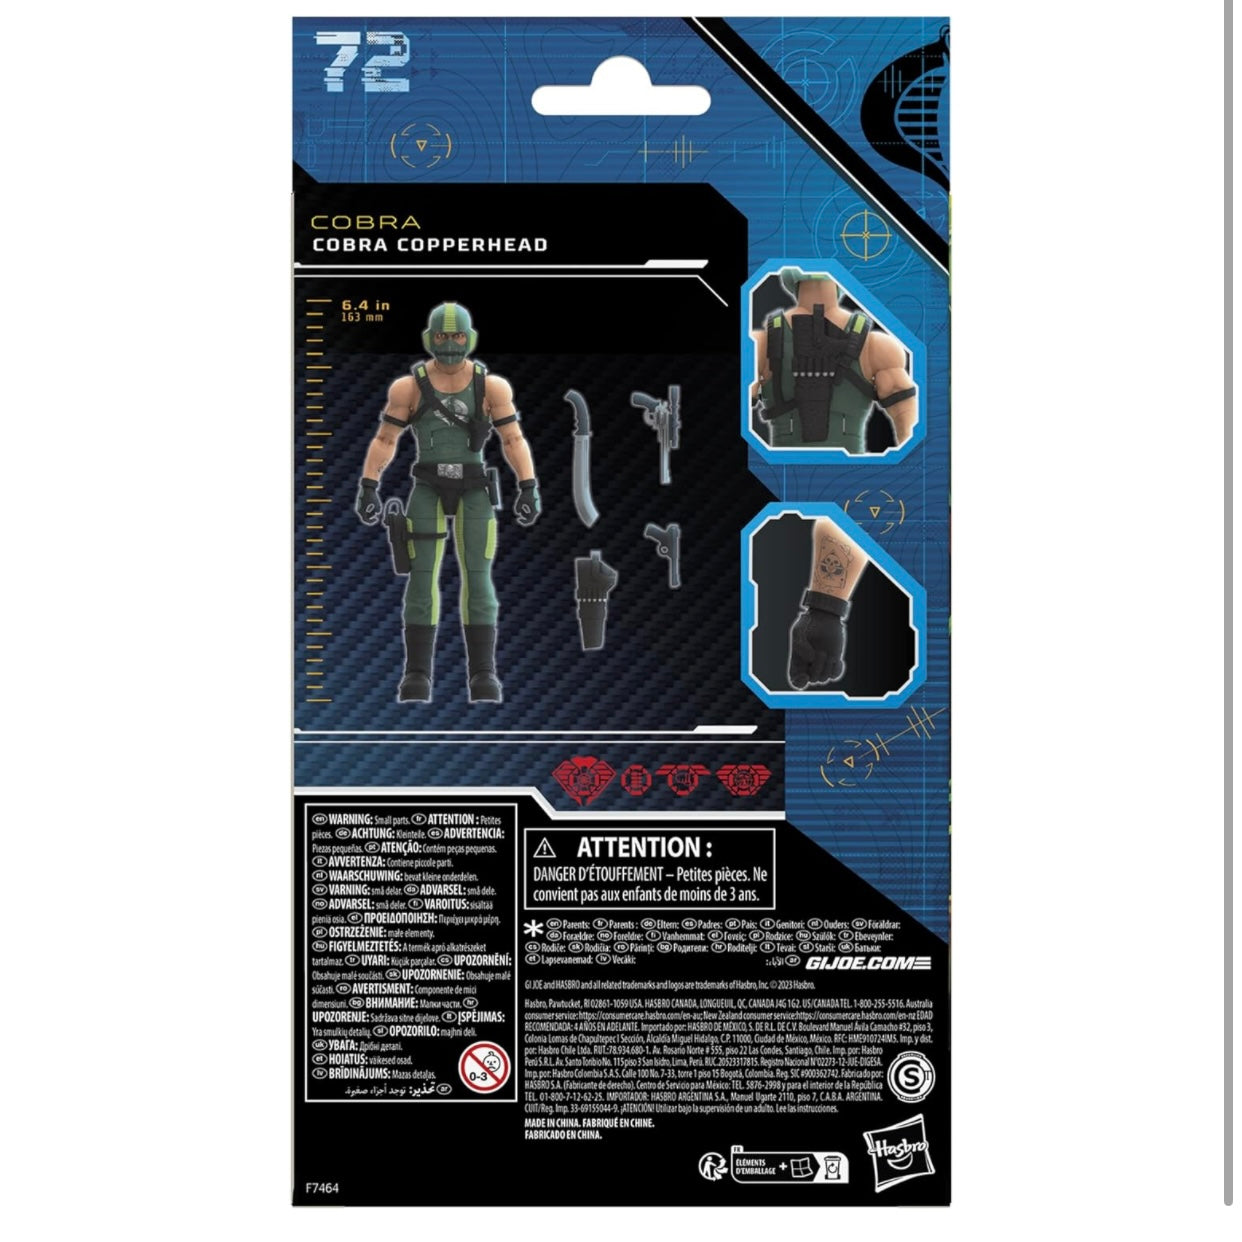 G. I. Joe Classified Series Cobra Copperhead, Collectible 72, 6 inch Action Figures